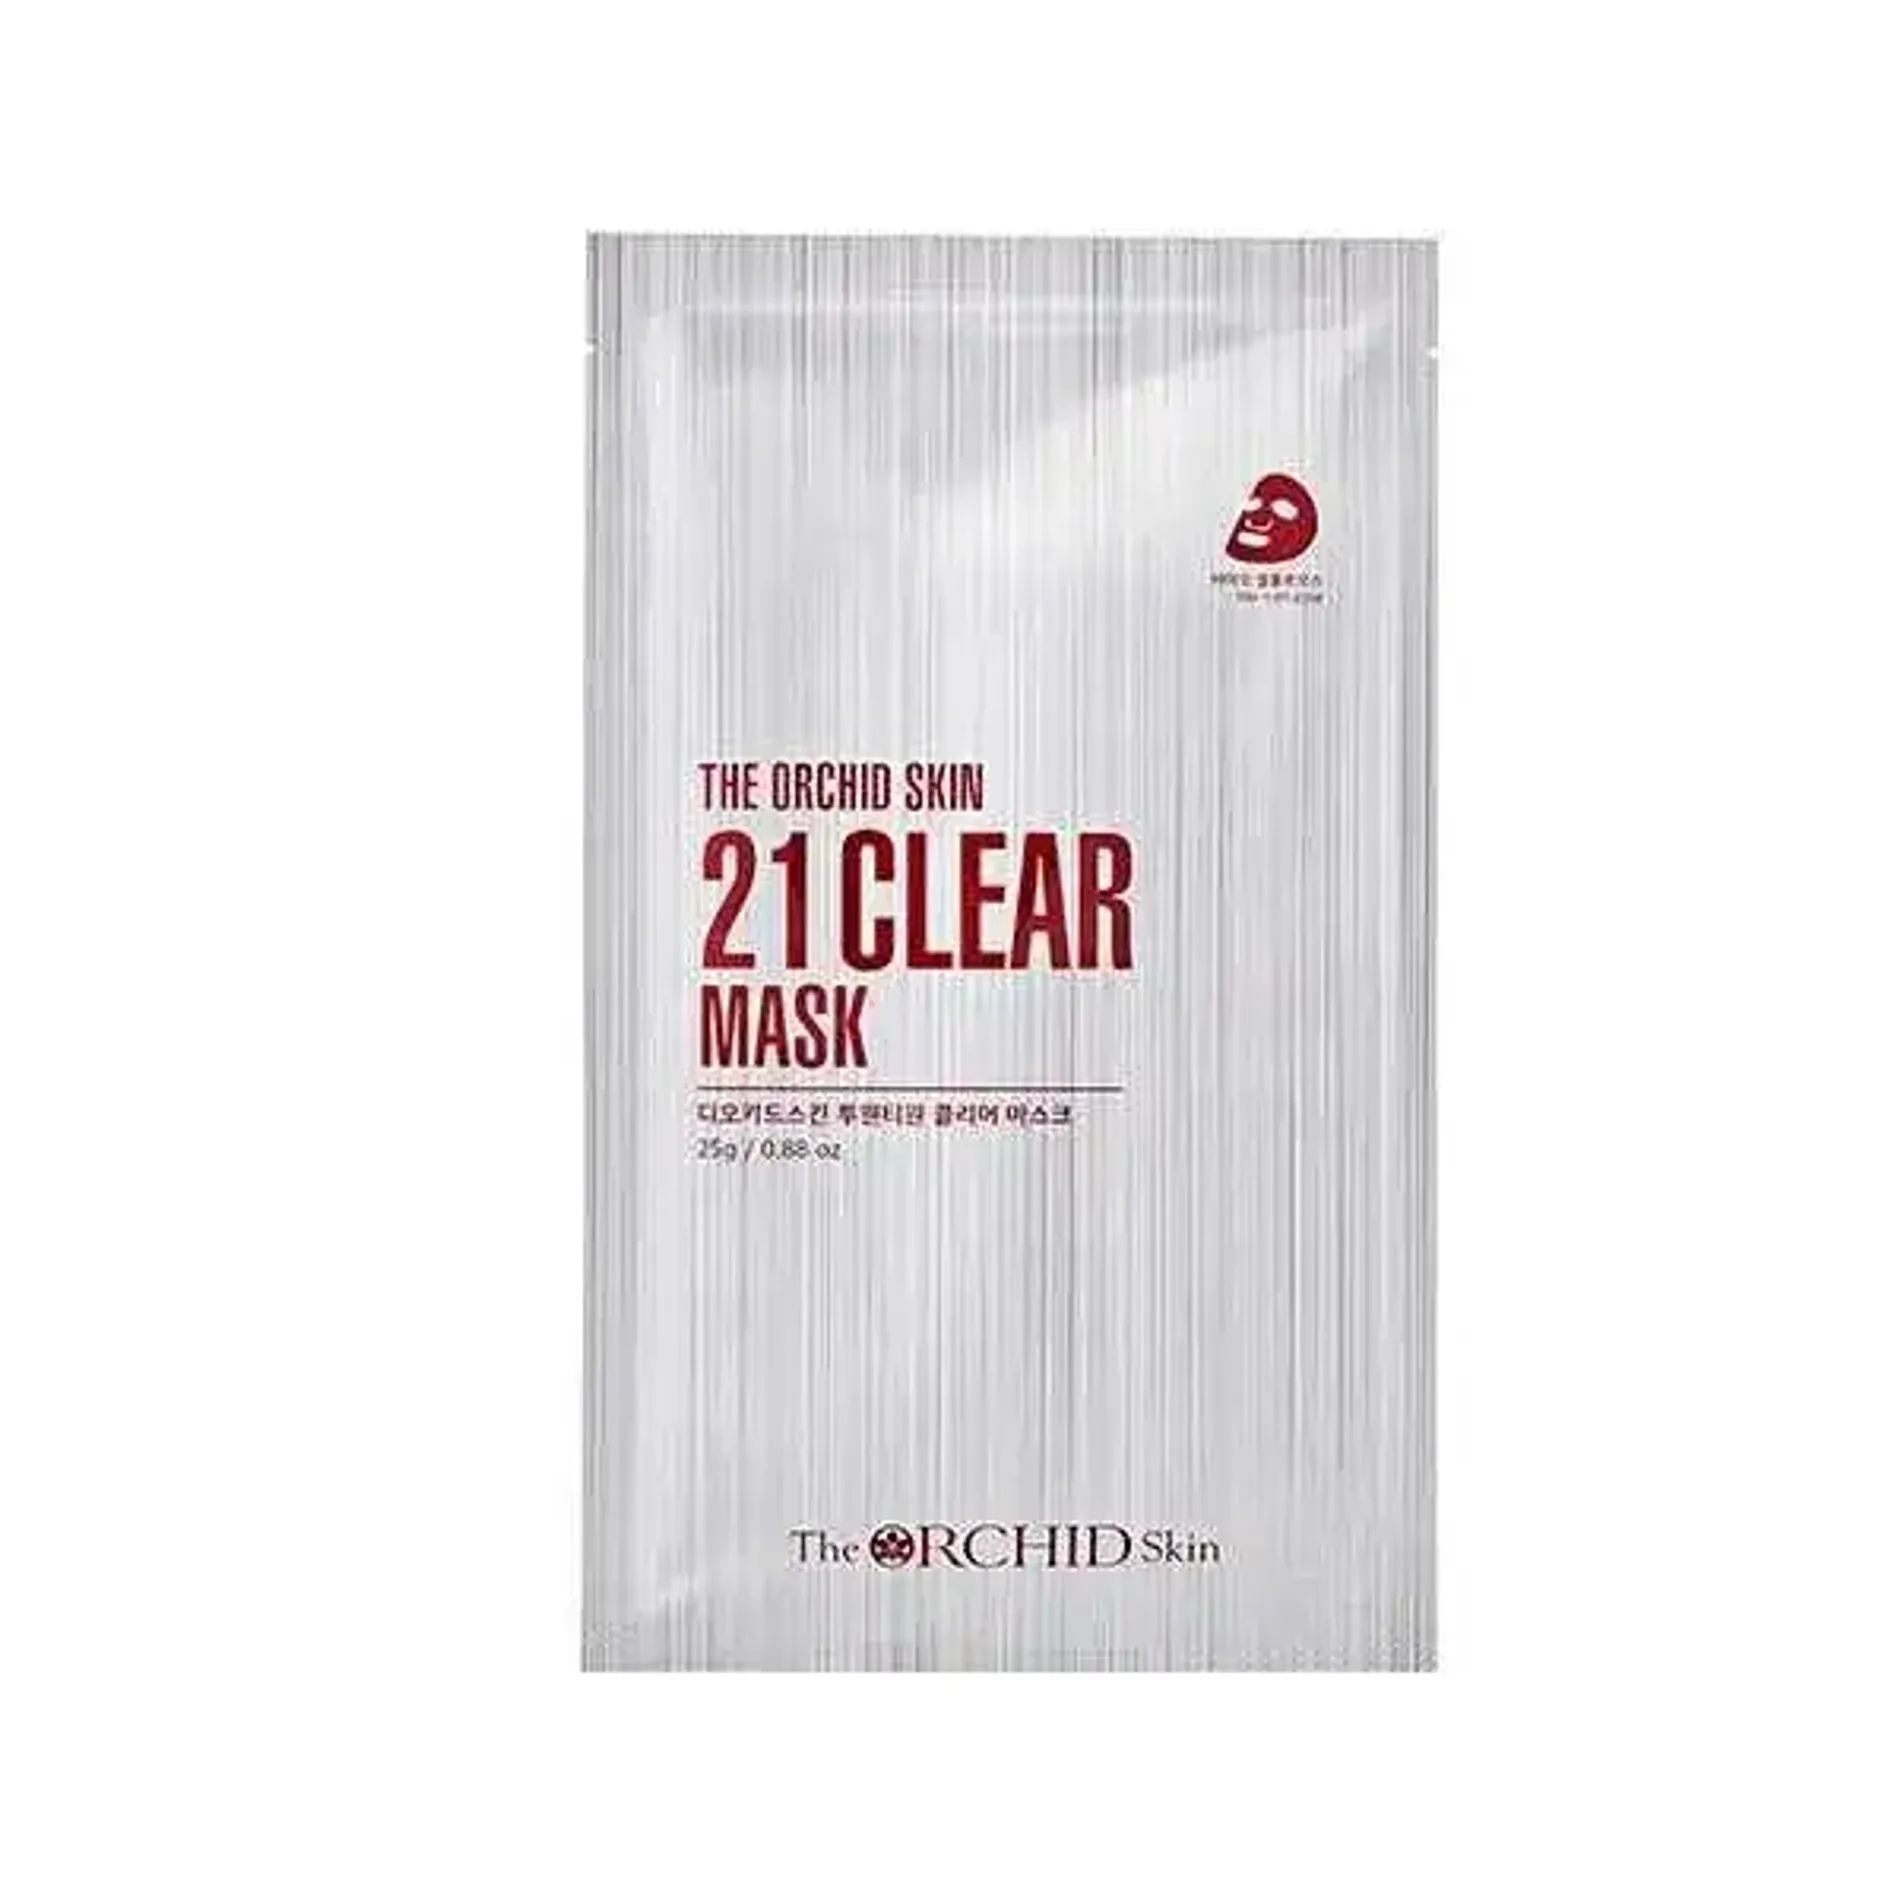 mat-na-giay-lam-sach-da-the-orchid-skin-21-clear-mask-5pieces-1